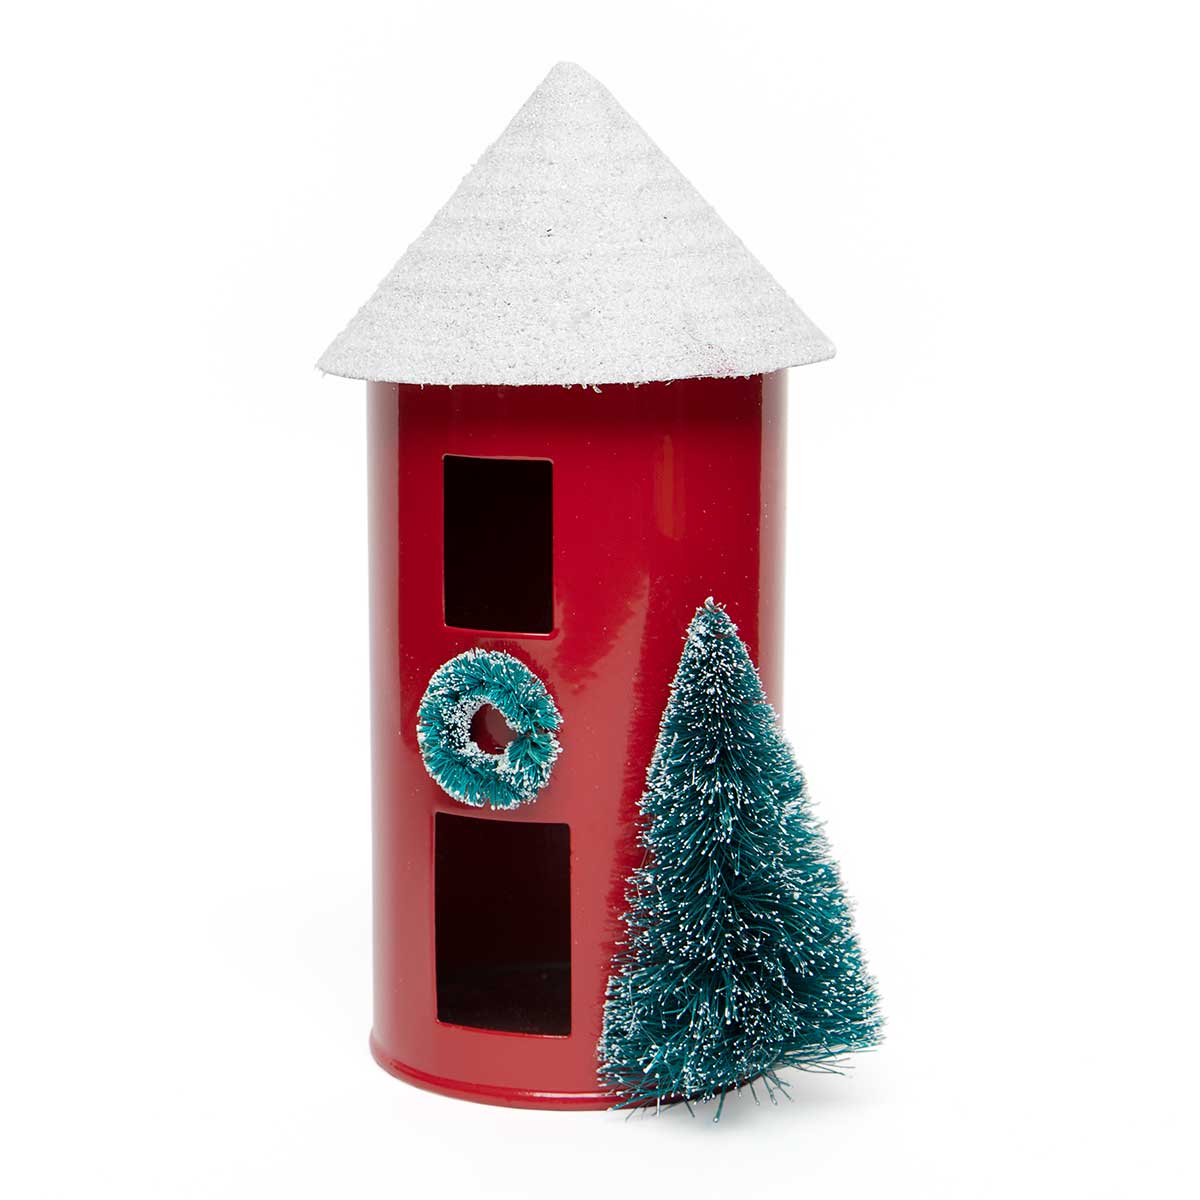 !METAL SILO RED WITH SNOW, GLITTER MICA, PINE WREATH AND b50